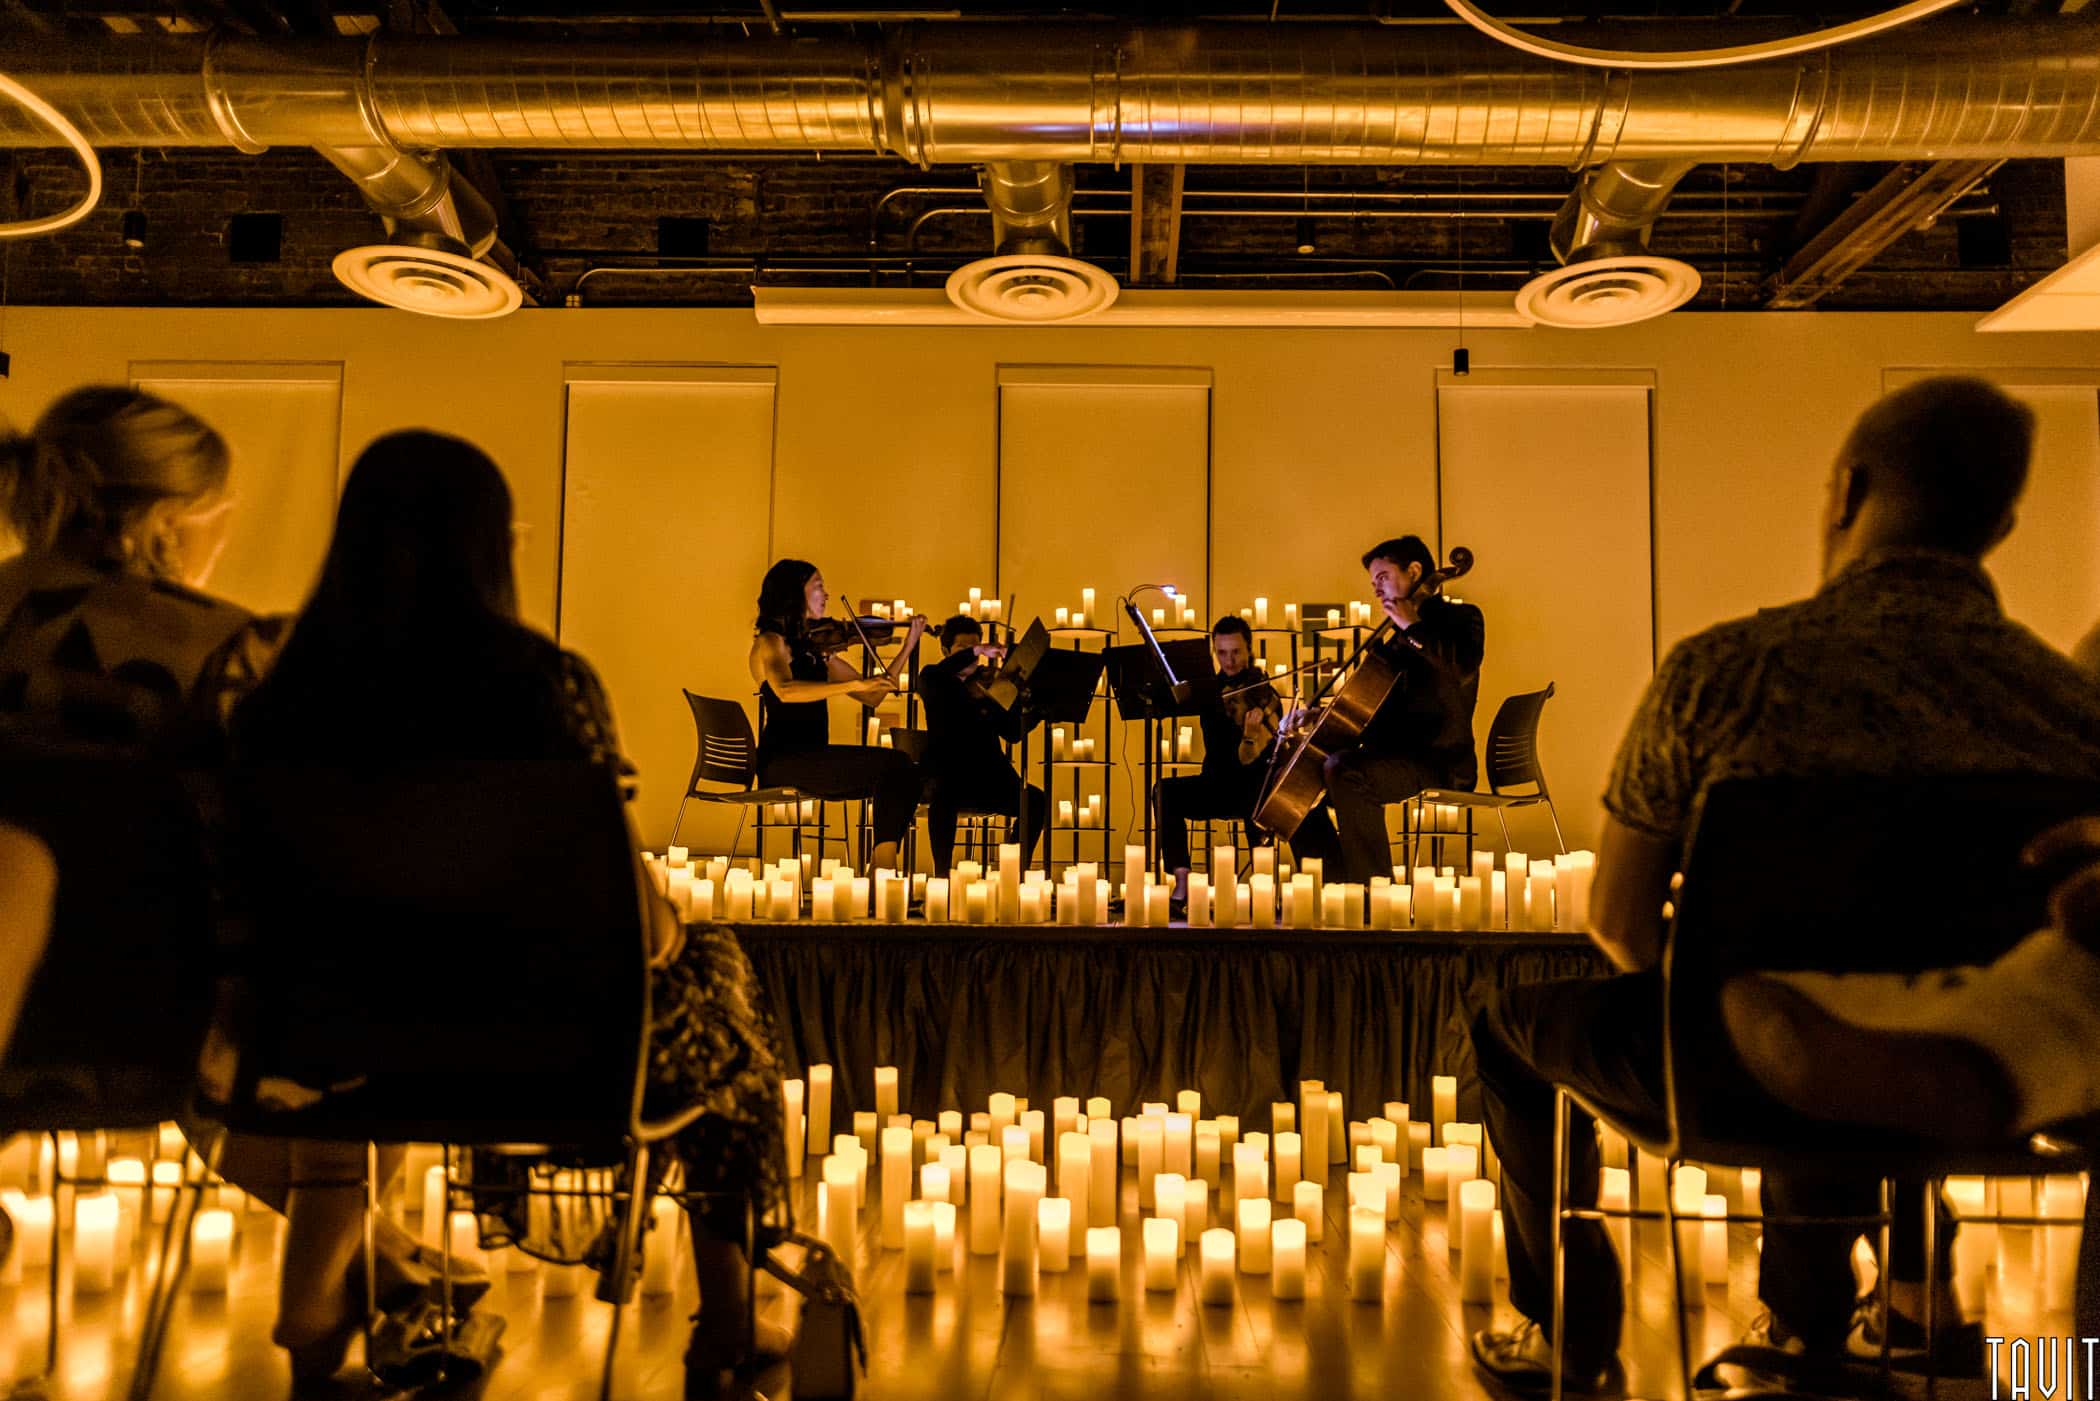 String quartet playing on stage surrounded by candles